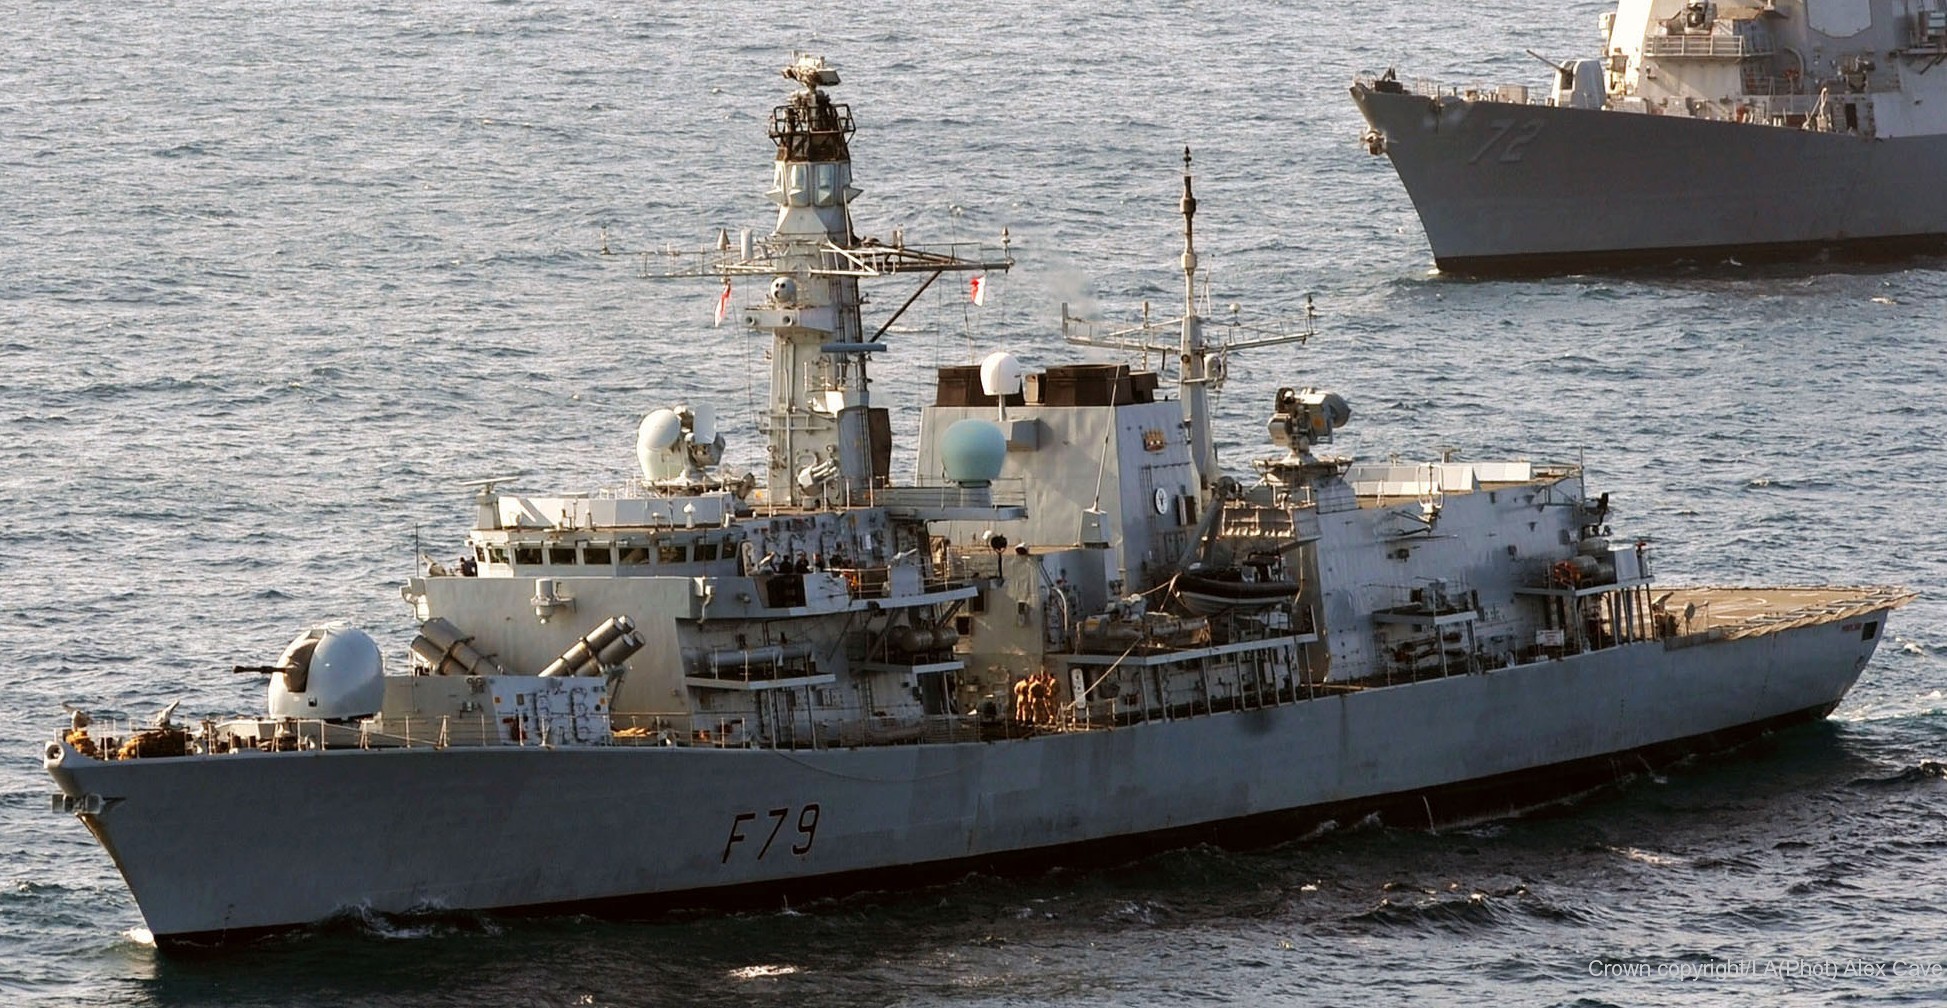 f-79 hms portland type 23 duke class guided missile frigate ffg royal navy 13x gec marconi yls